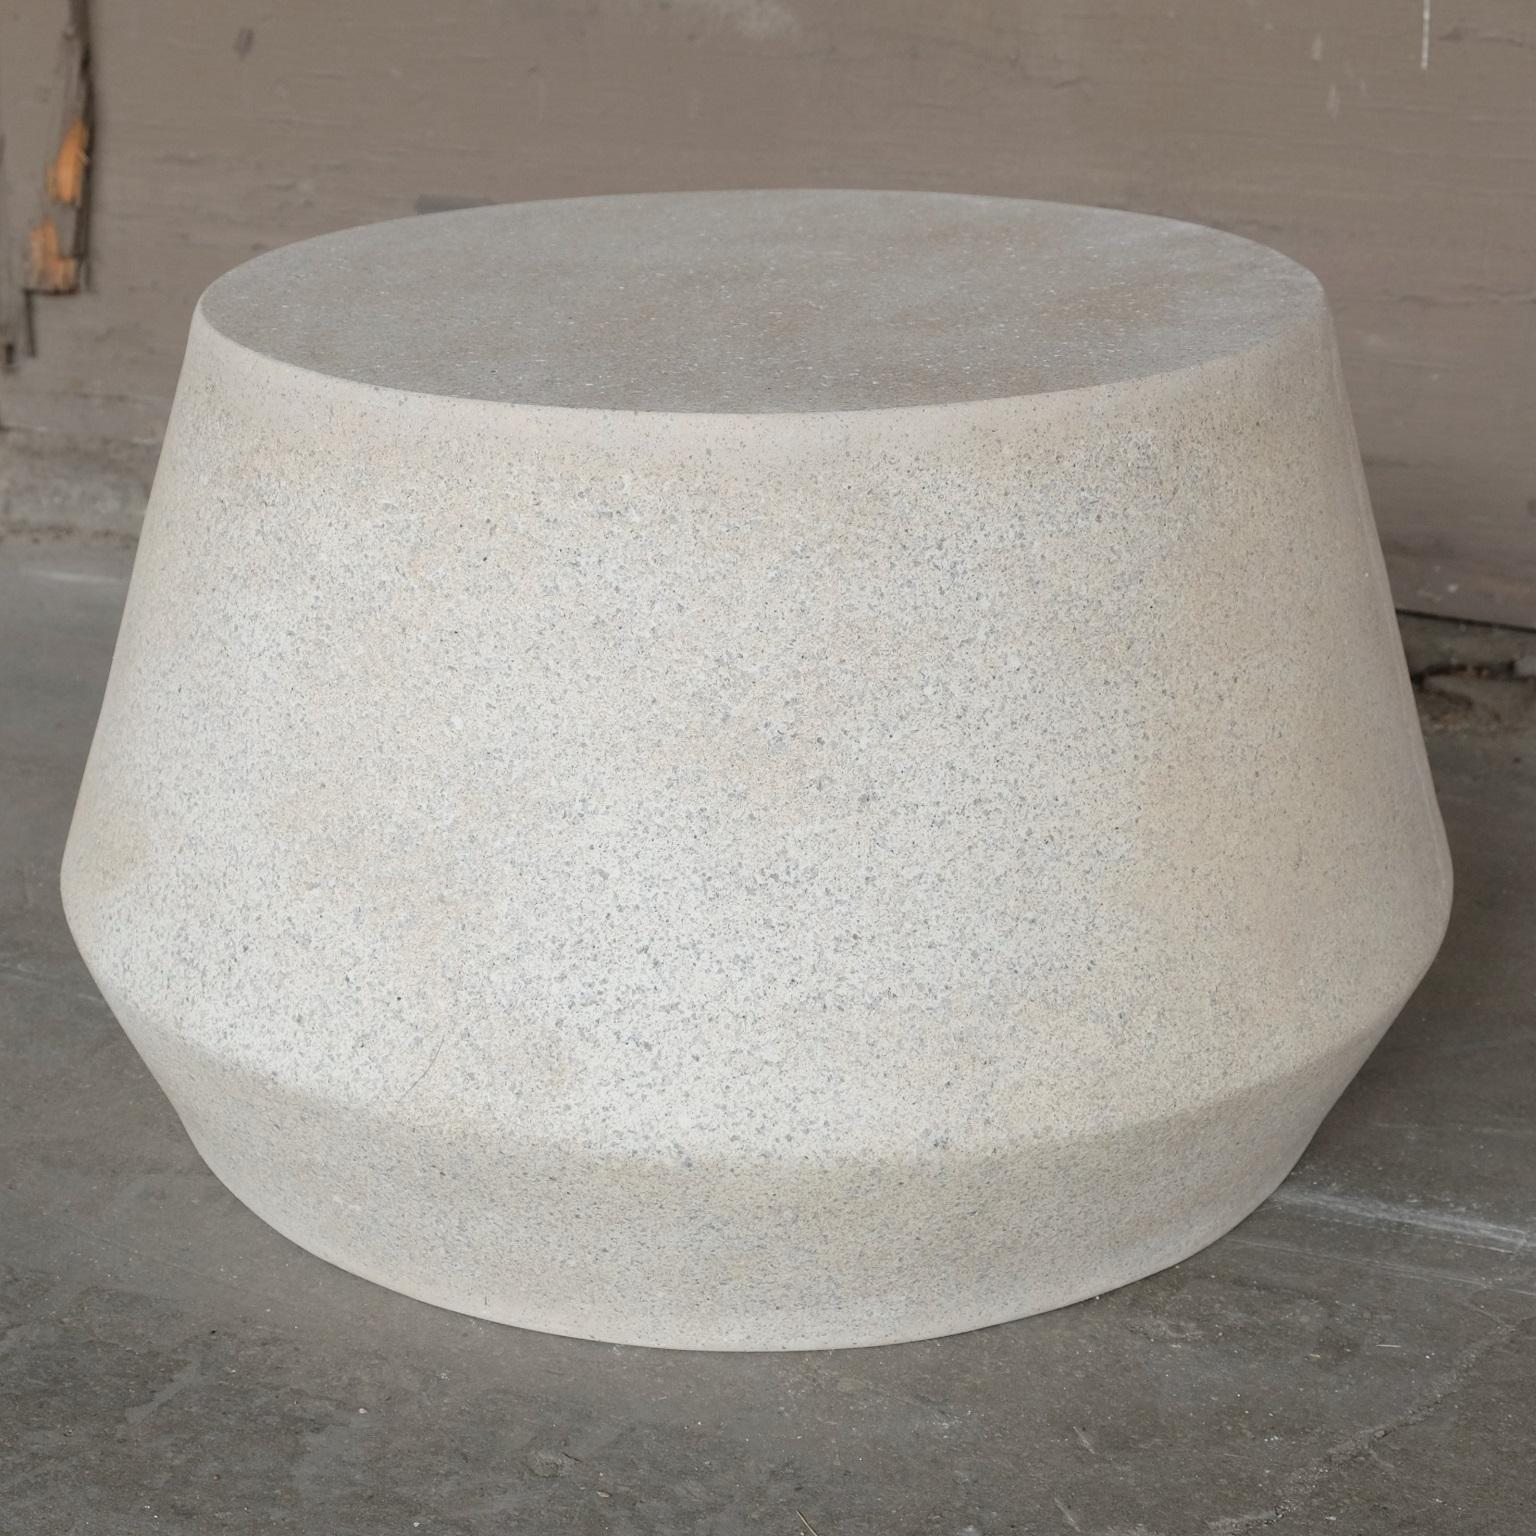 Elegantly playful and a bright complement.

Dimensions: Diameter 24 in. (61 cm), height 14 in. (36 cm), weight 20 lbs. (9 kg)

Finish color options:
White stone
Natural stone
Aged stone (shown)
Keystone
Coal stone

Materials: resin, stone aggregate